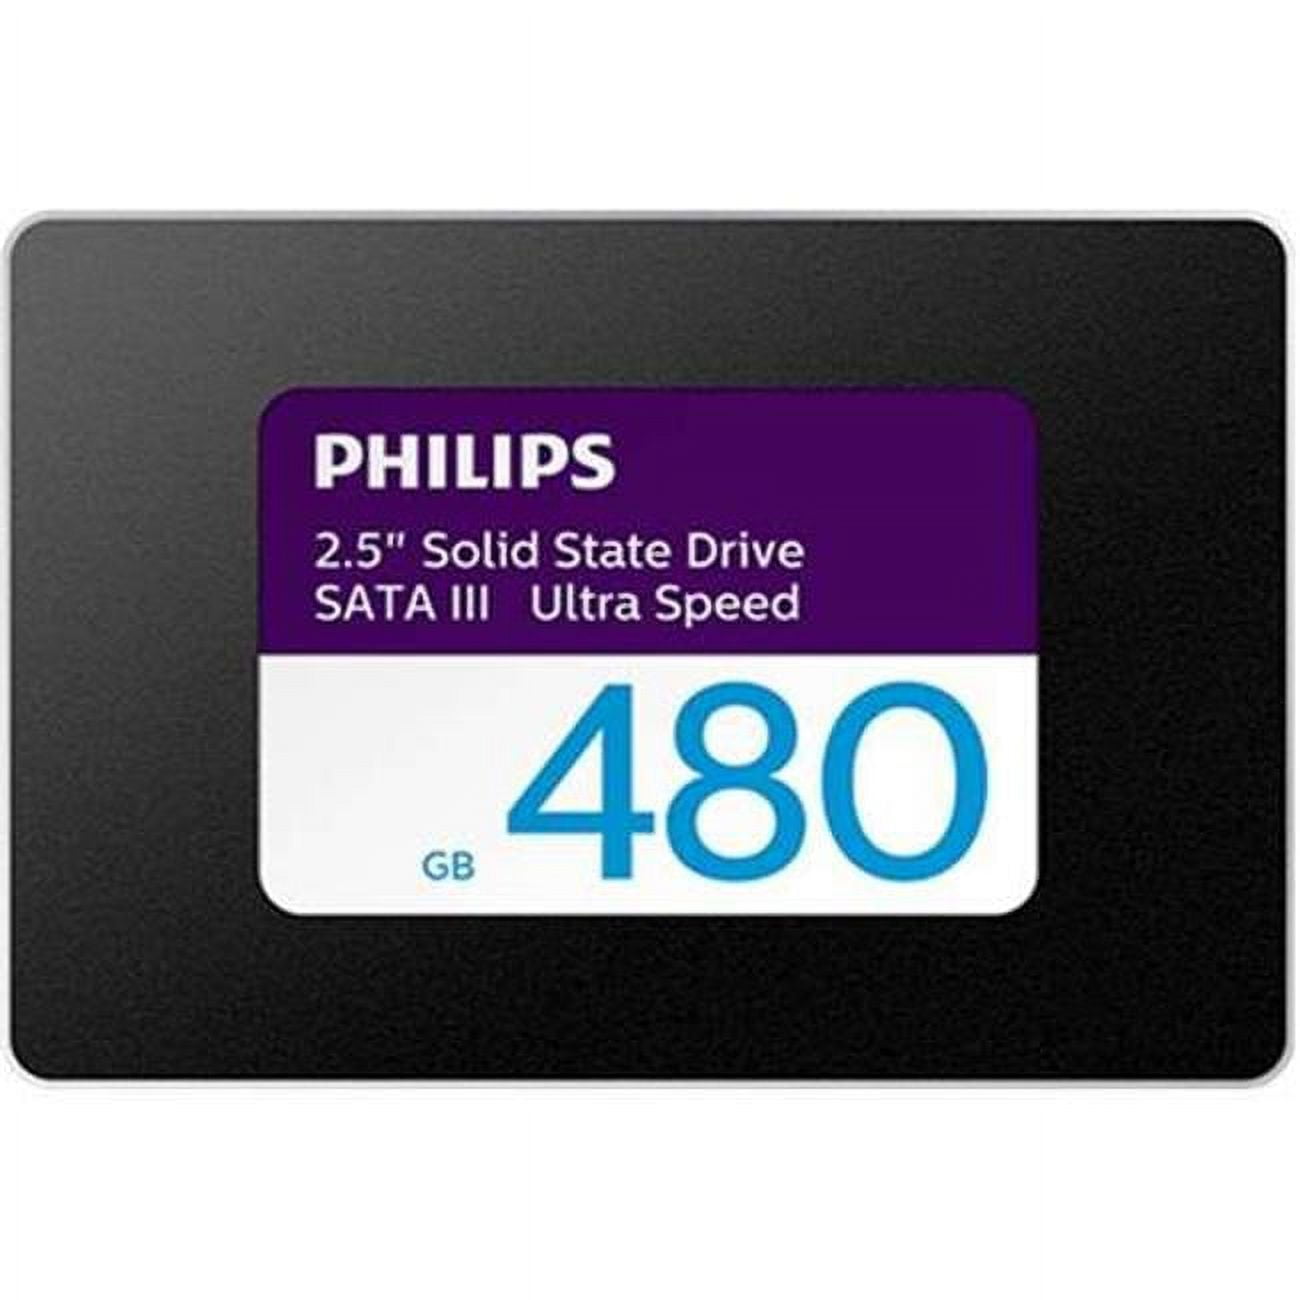 Picture of Philips PHSSDINT25480G01 Ultra Speed 480GB Internal SSD - 2.5 in. SATA III